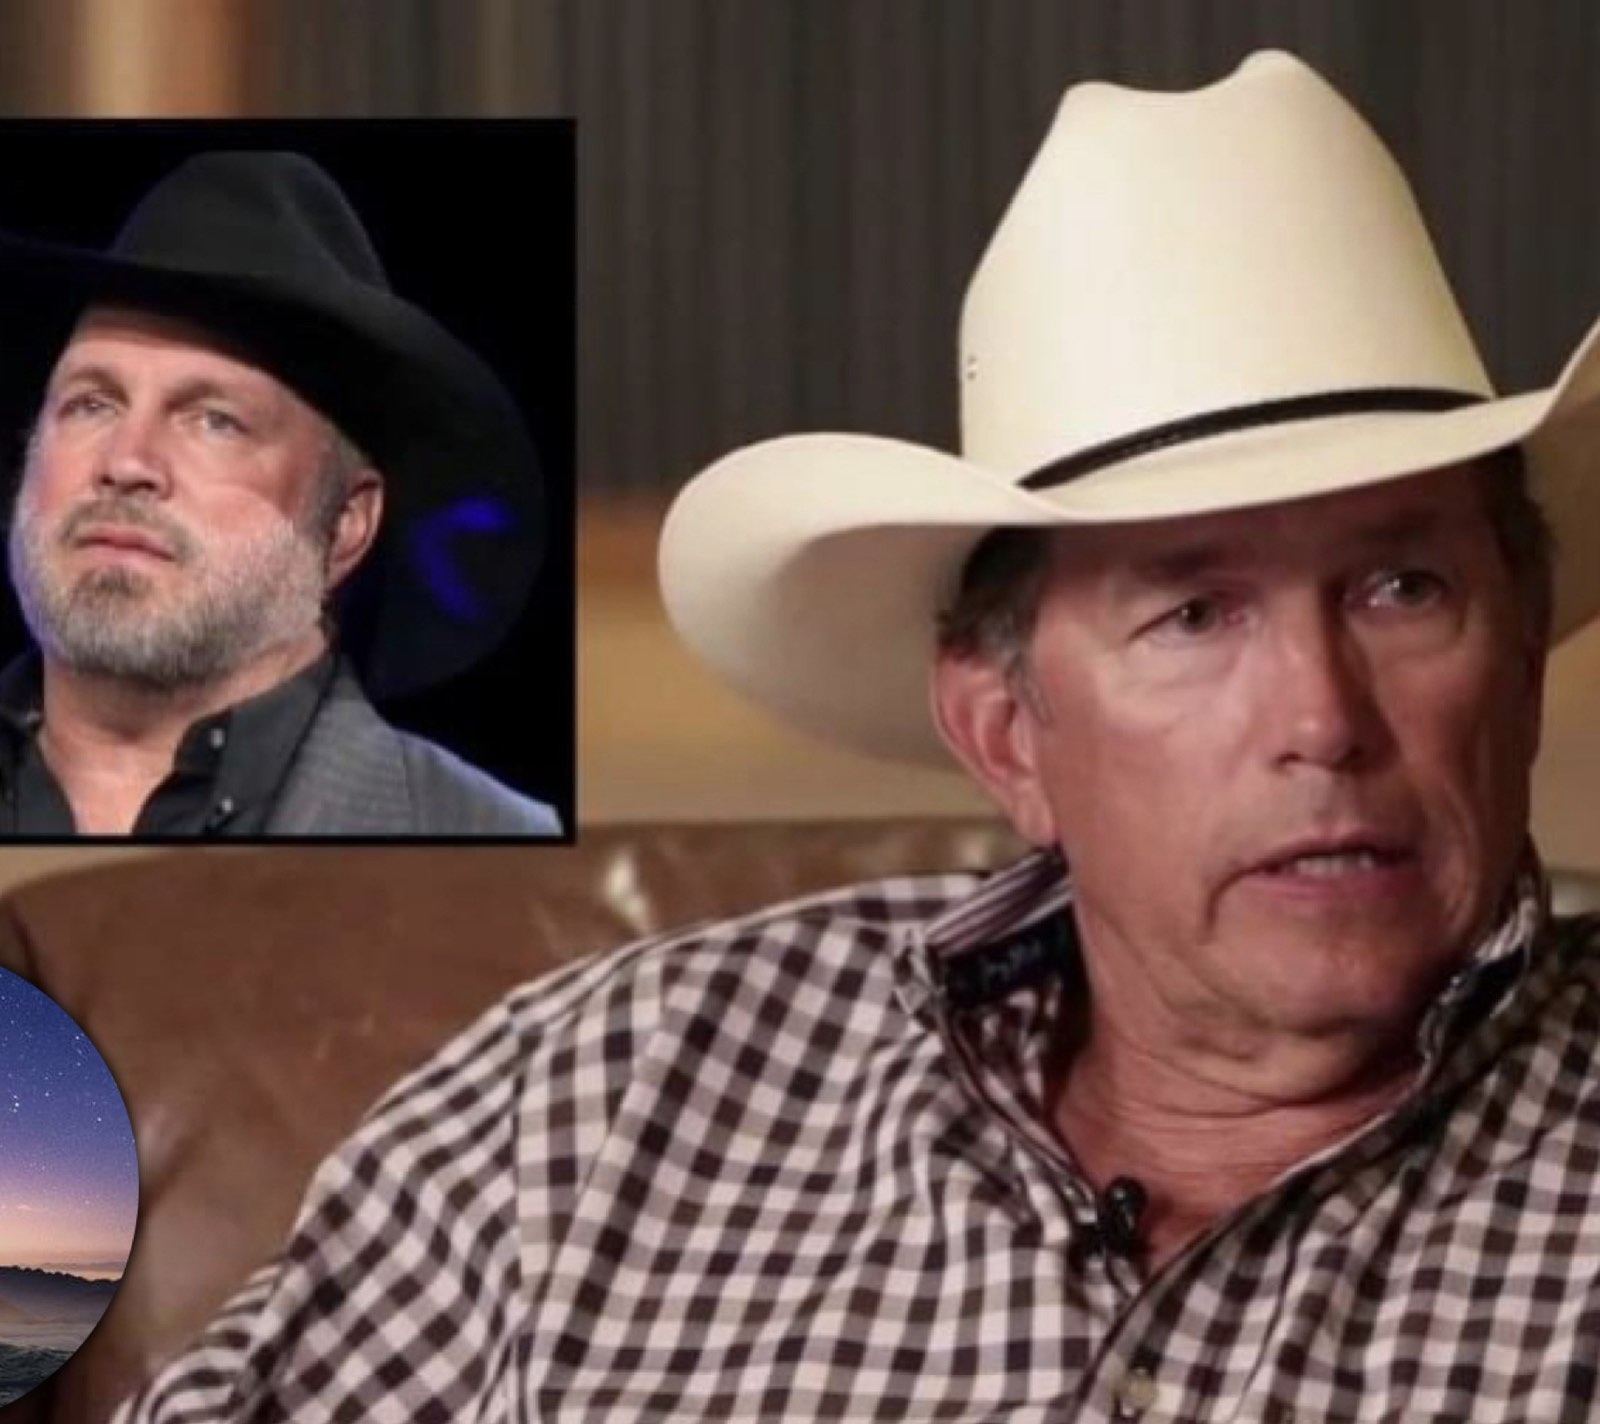 “George Strait Breaks His Silence on Garth Brooks: “He’s Not Part of Our Circle”